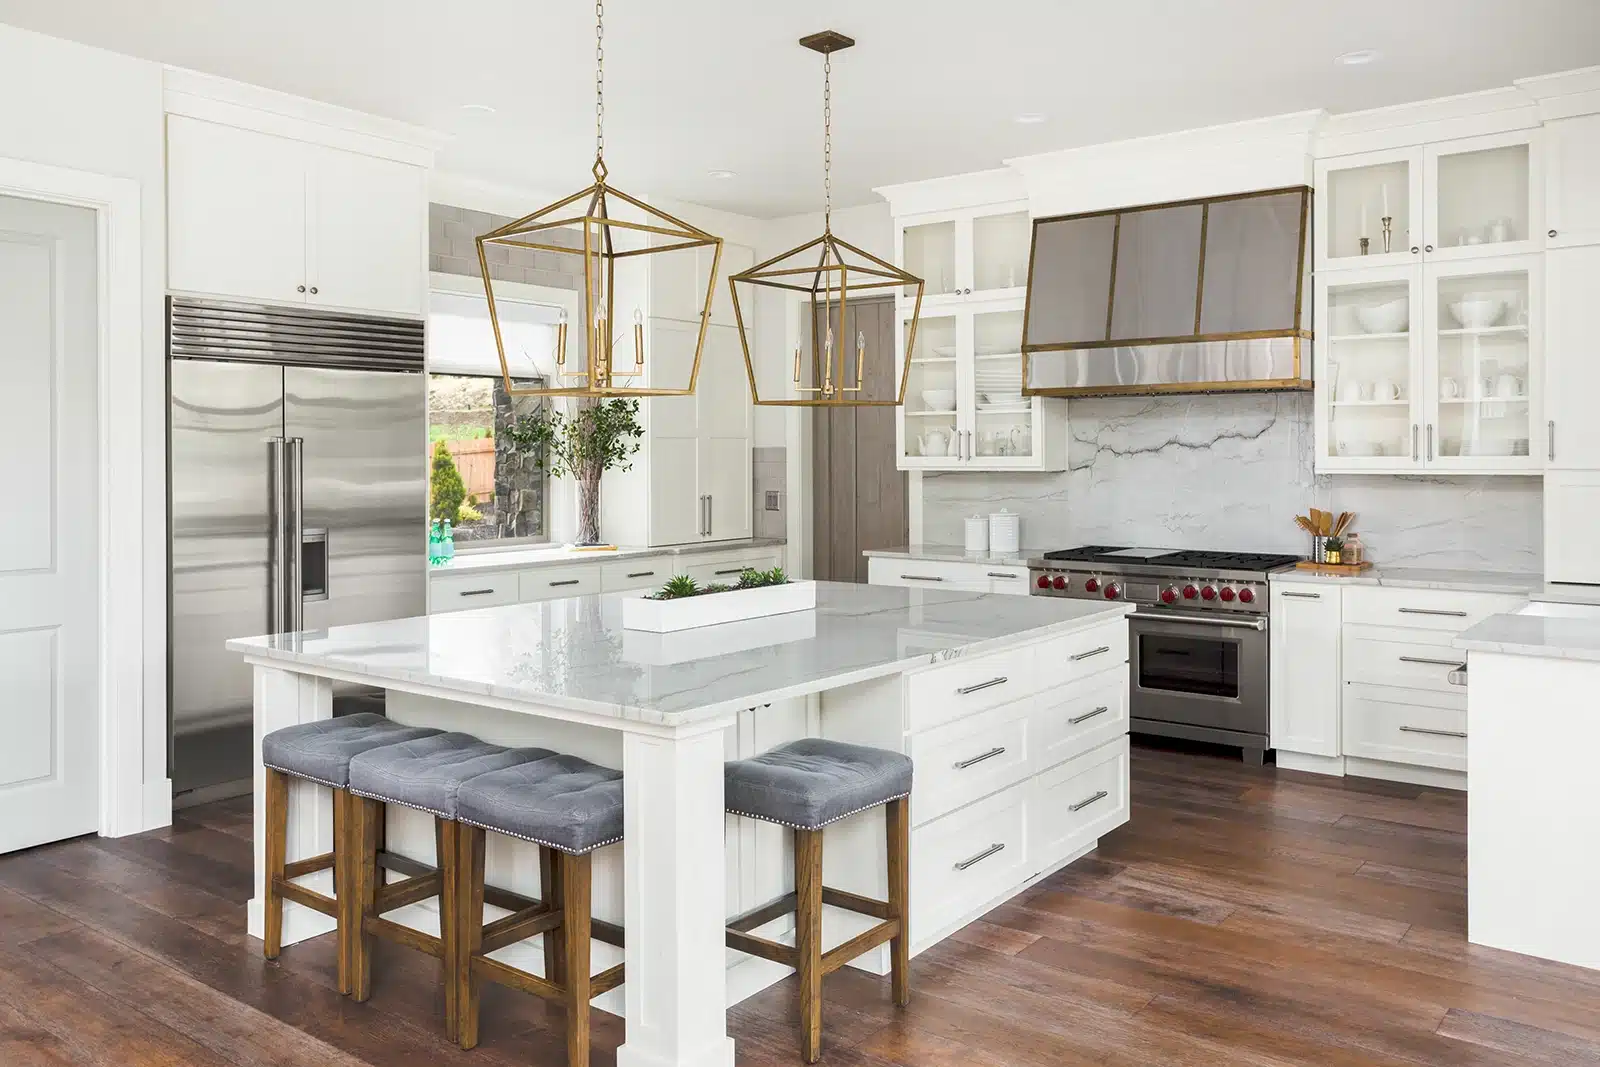 A luxurious kitchen featuring a large central island with comfortable seating and elegant pendant lights, highlighting the benefits of adding an island to the space